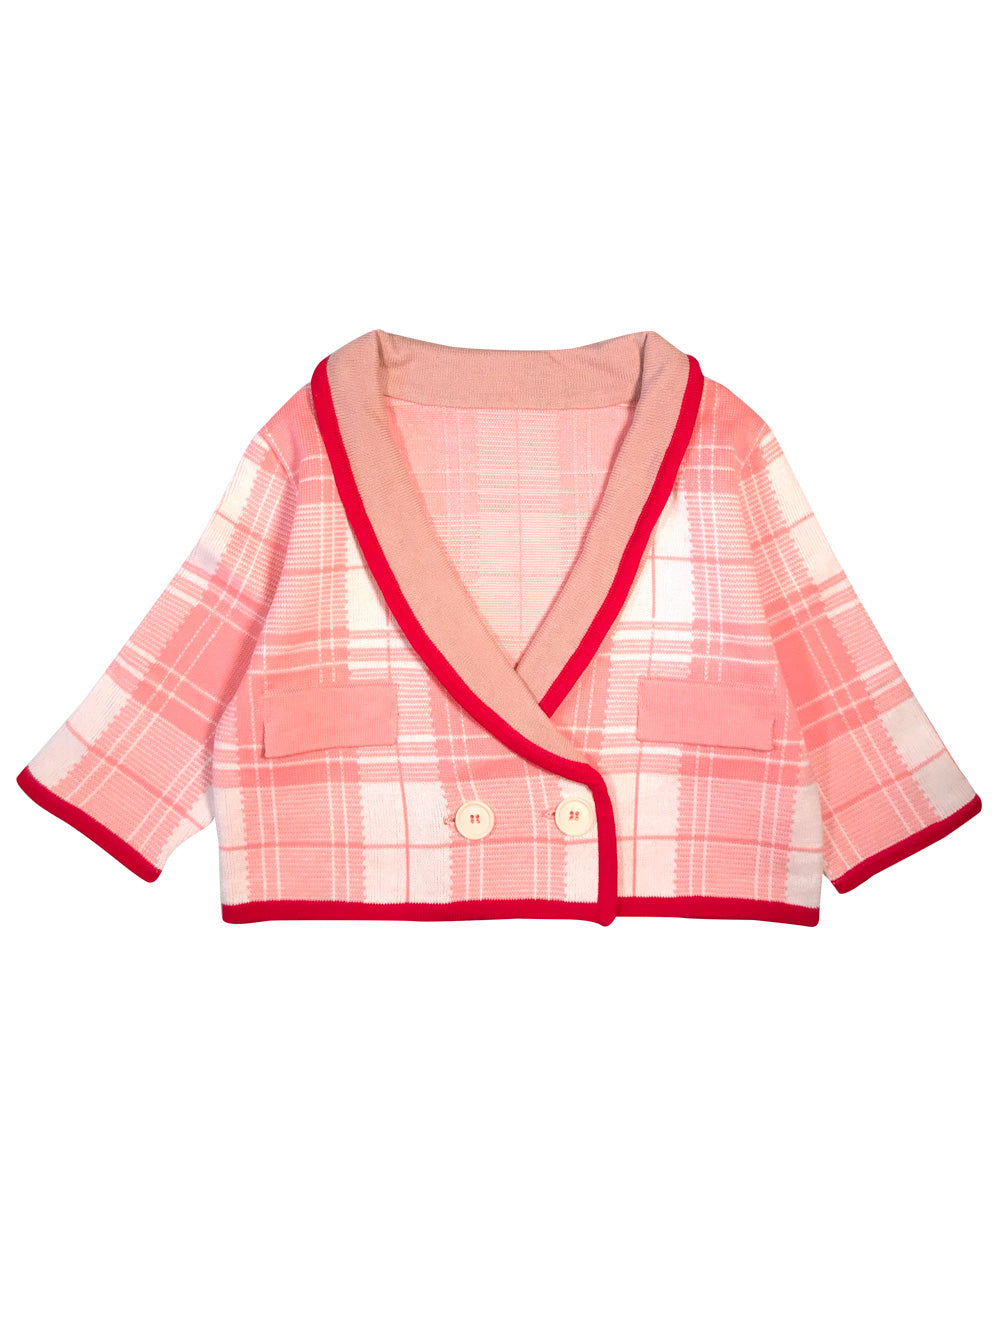 Pink Checked Jacket